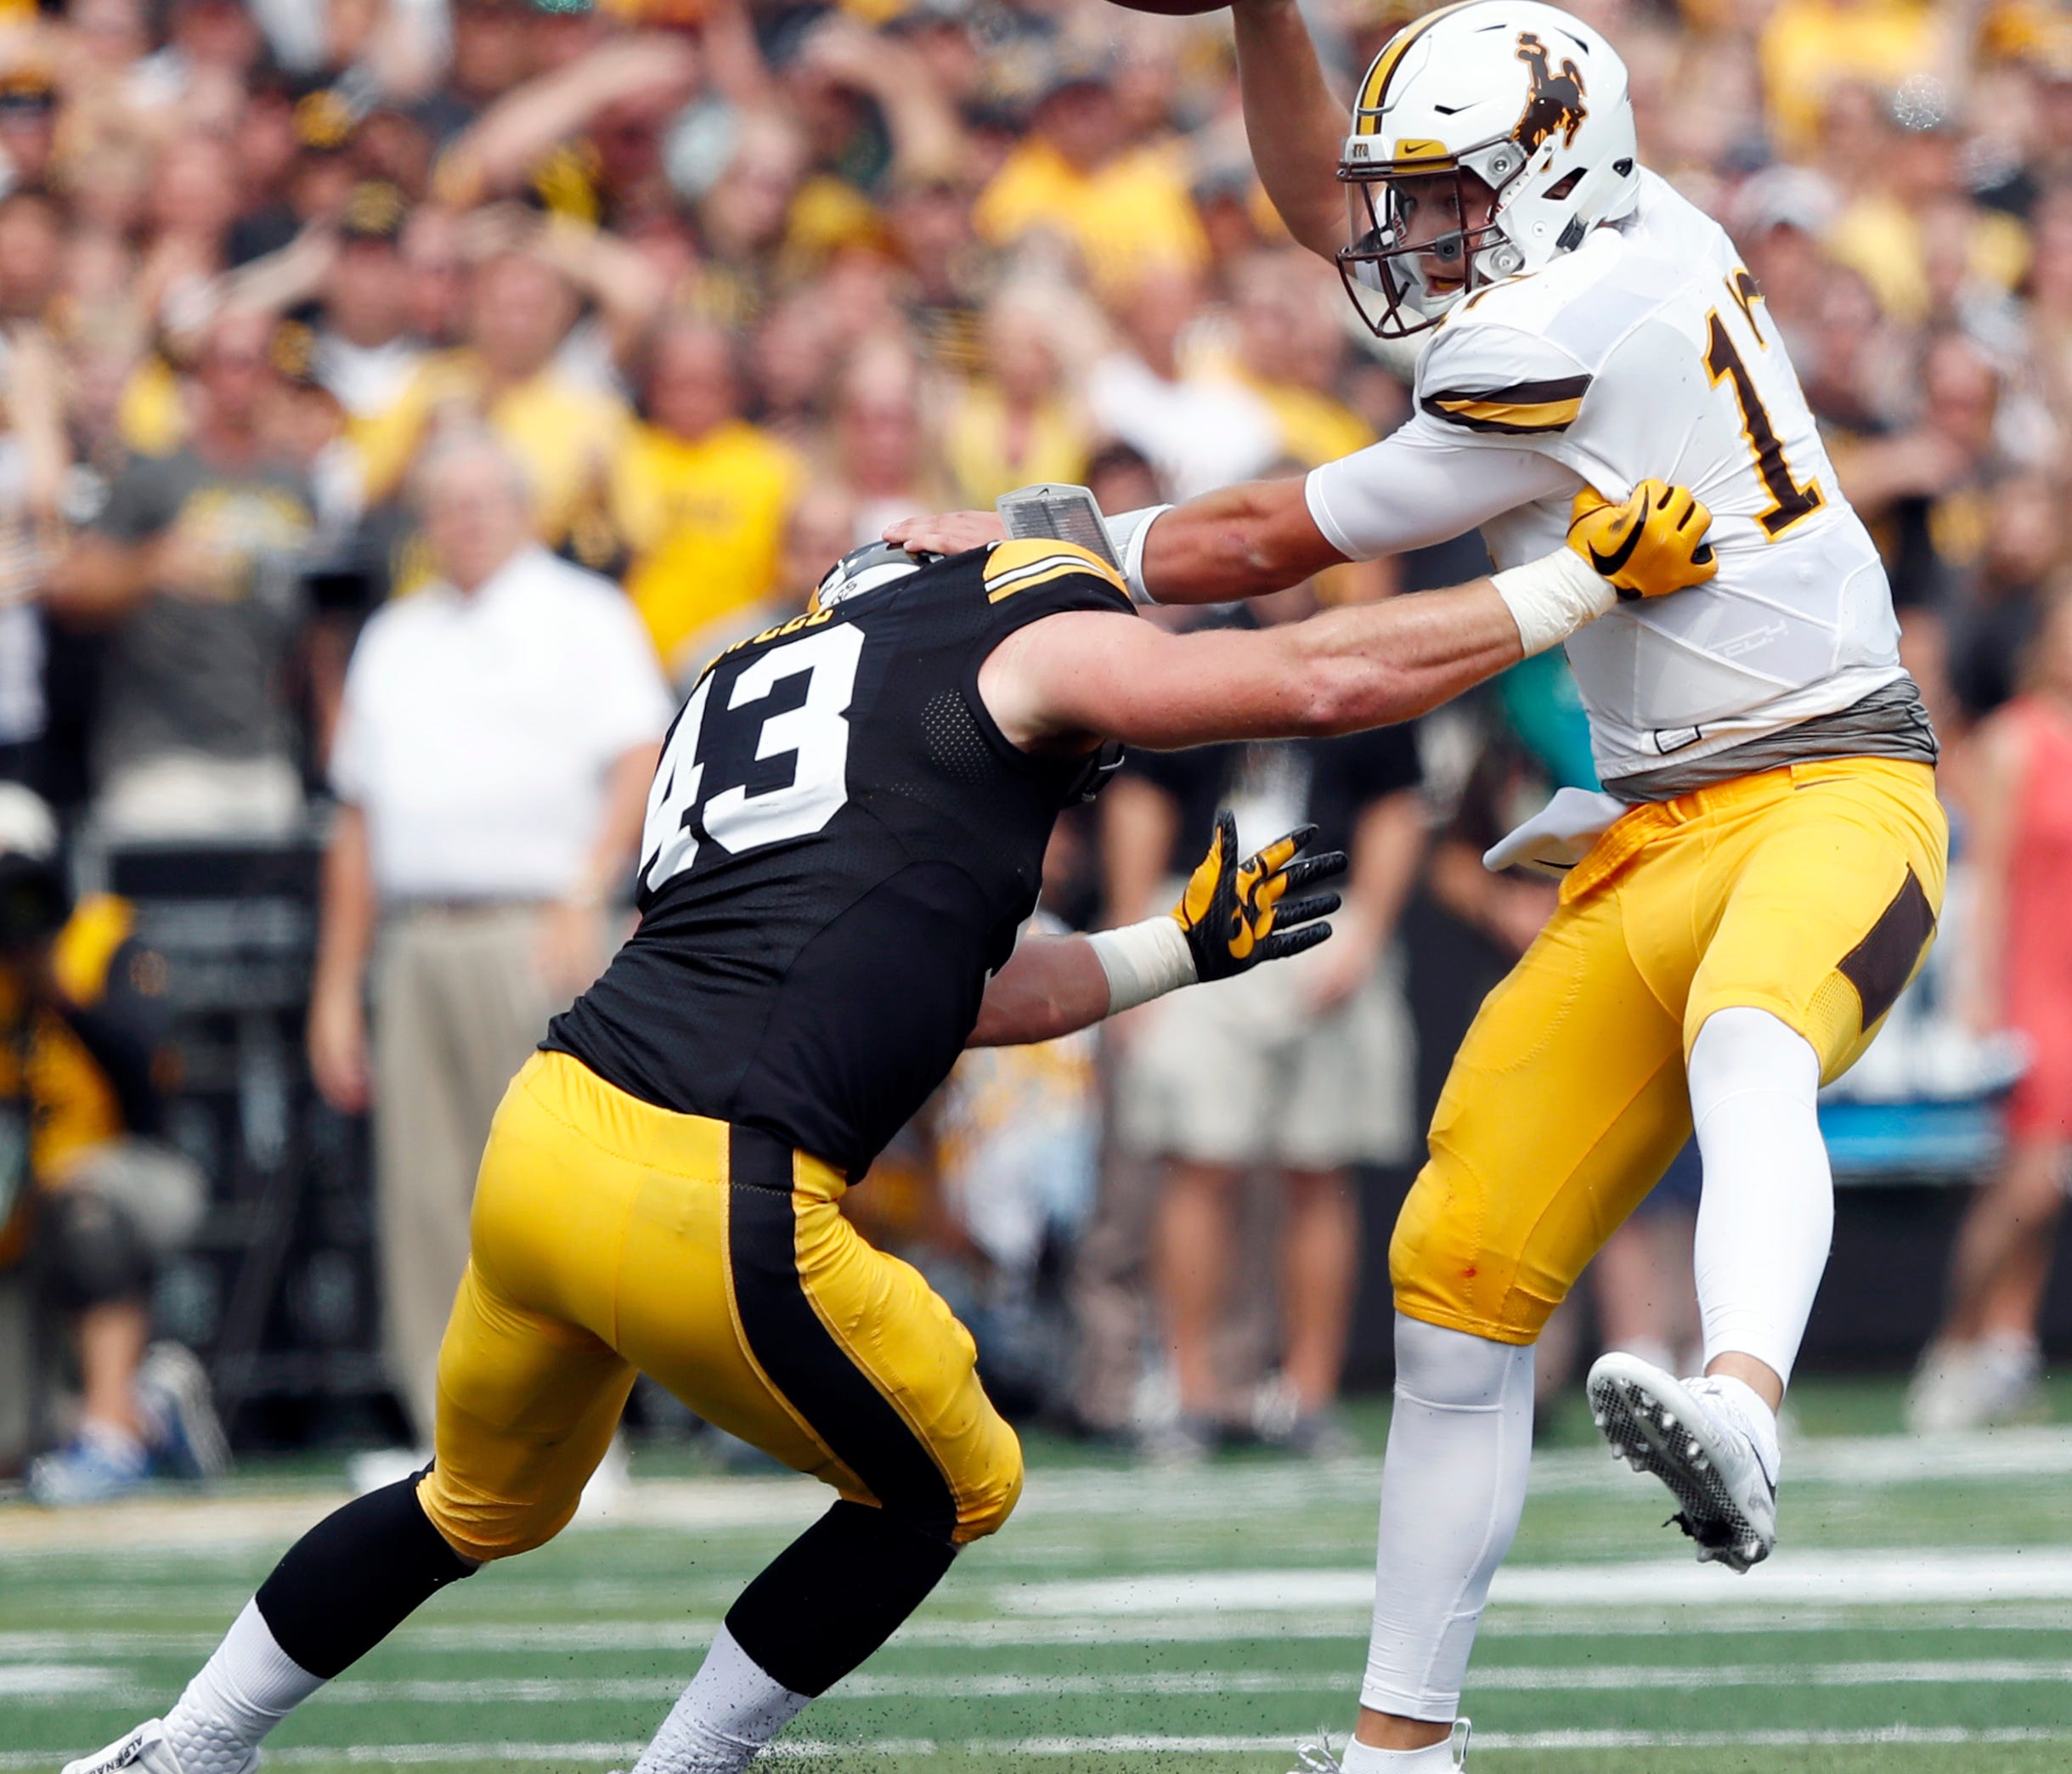 Wyoming quarterback Josh Allen is sacked by Iowa linebacker Josey Jewell, left, during the first half of an NCAA college football game, Saturday, Sept. 2, 2017, in Iowa City, Iowa. (AP Photo/Charlie Neibergall)